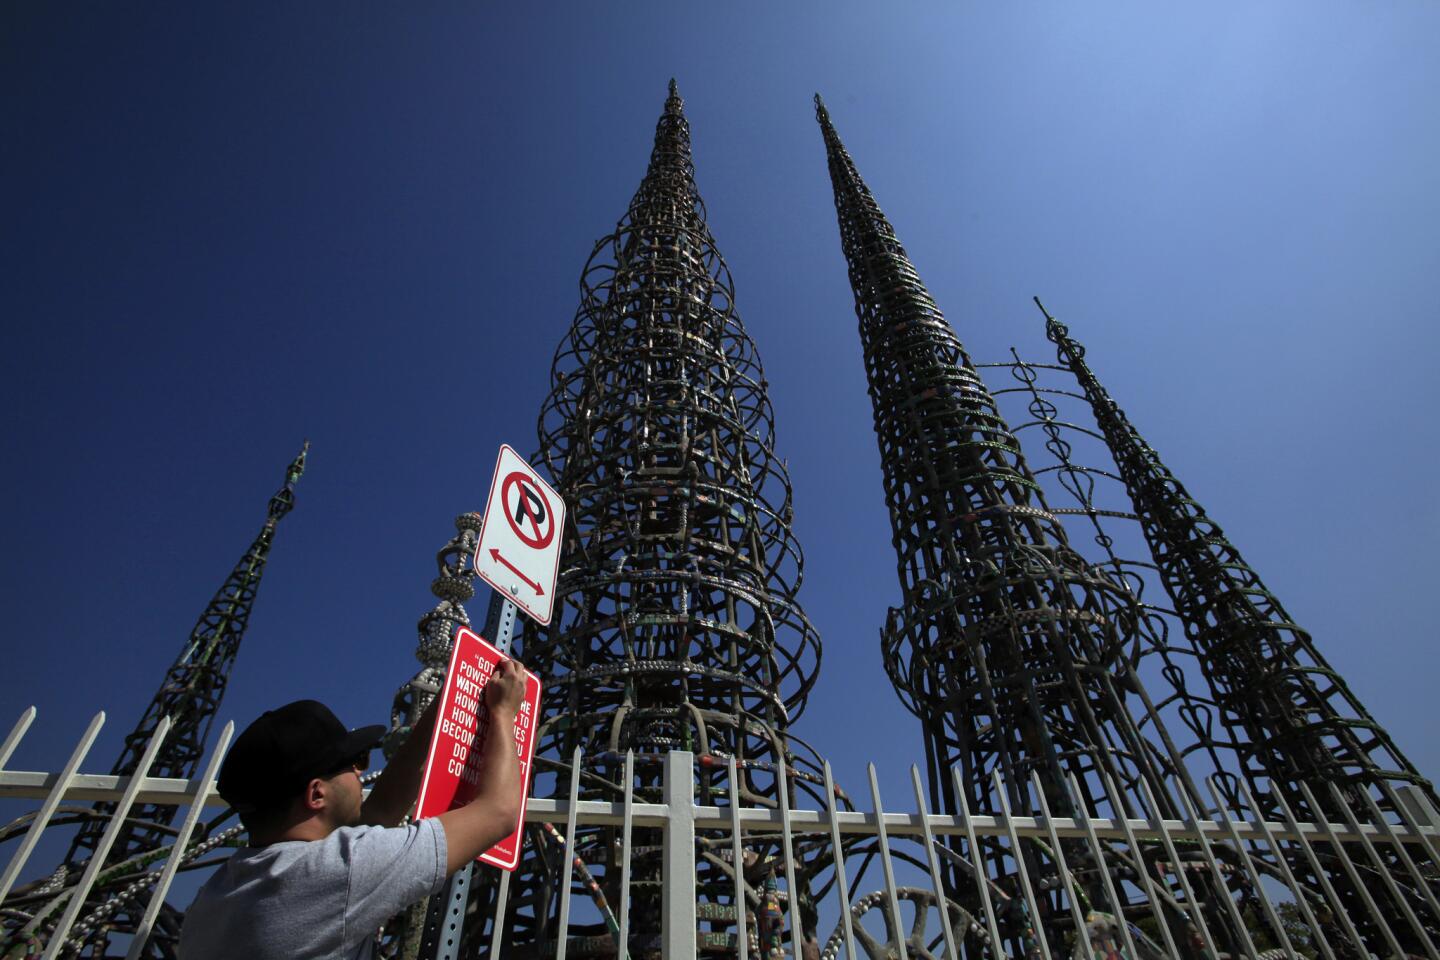 Street artist Jason Shelowitz (a.k.a. Jay Shells) installs a sign at Watts Towers featuring rap lyrics by Crooked I: "Got street power from the Watts Towers to Howard Hughes. How would you become me I don't Do what you cowards do."